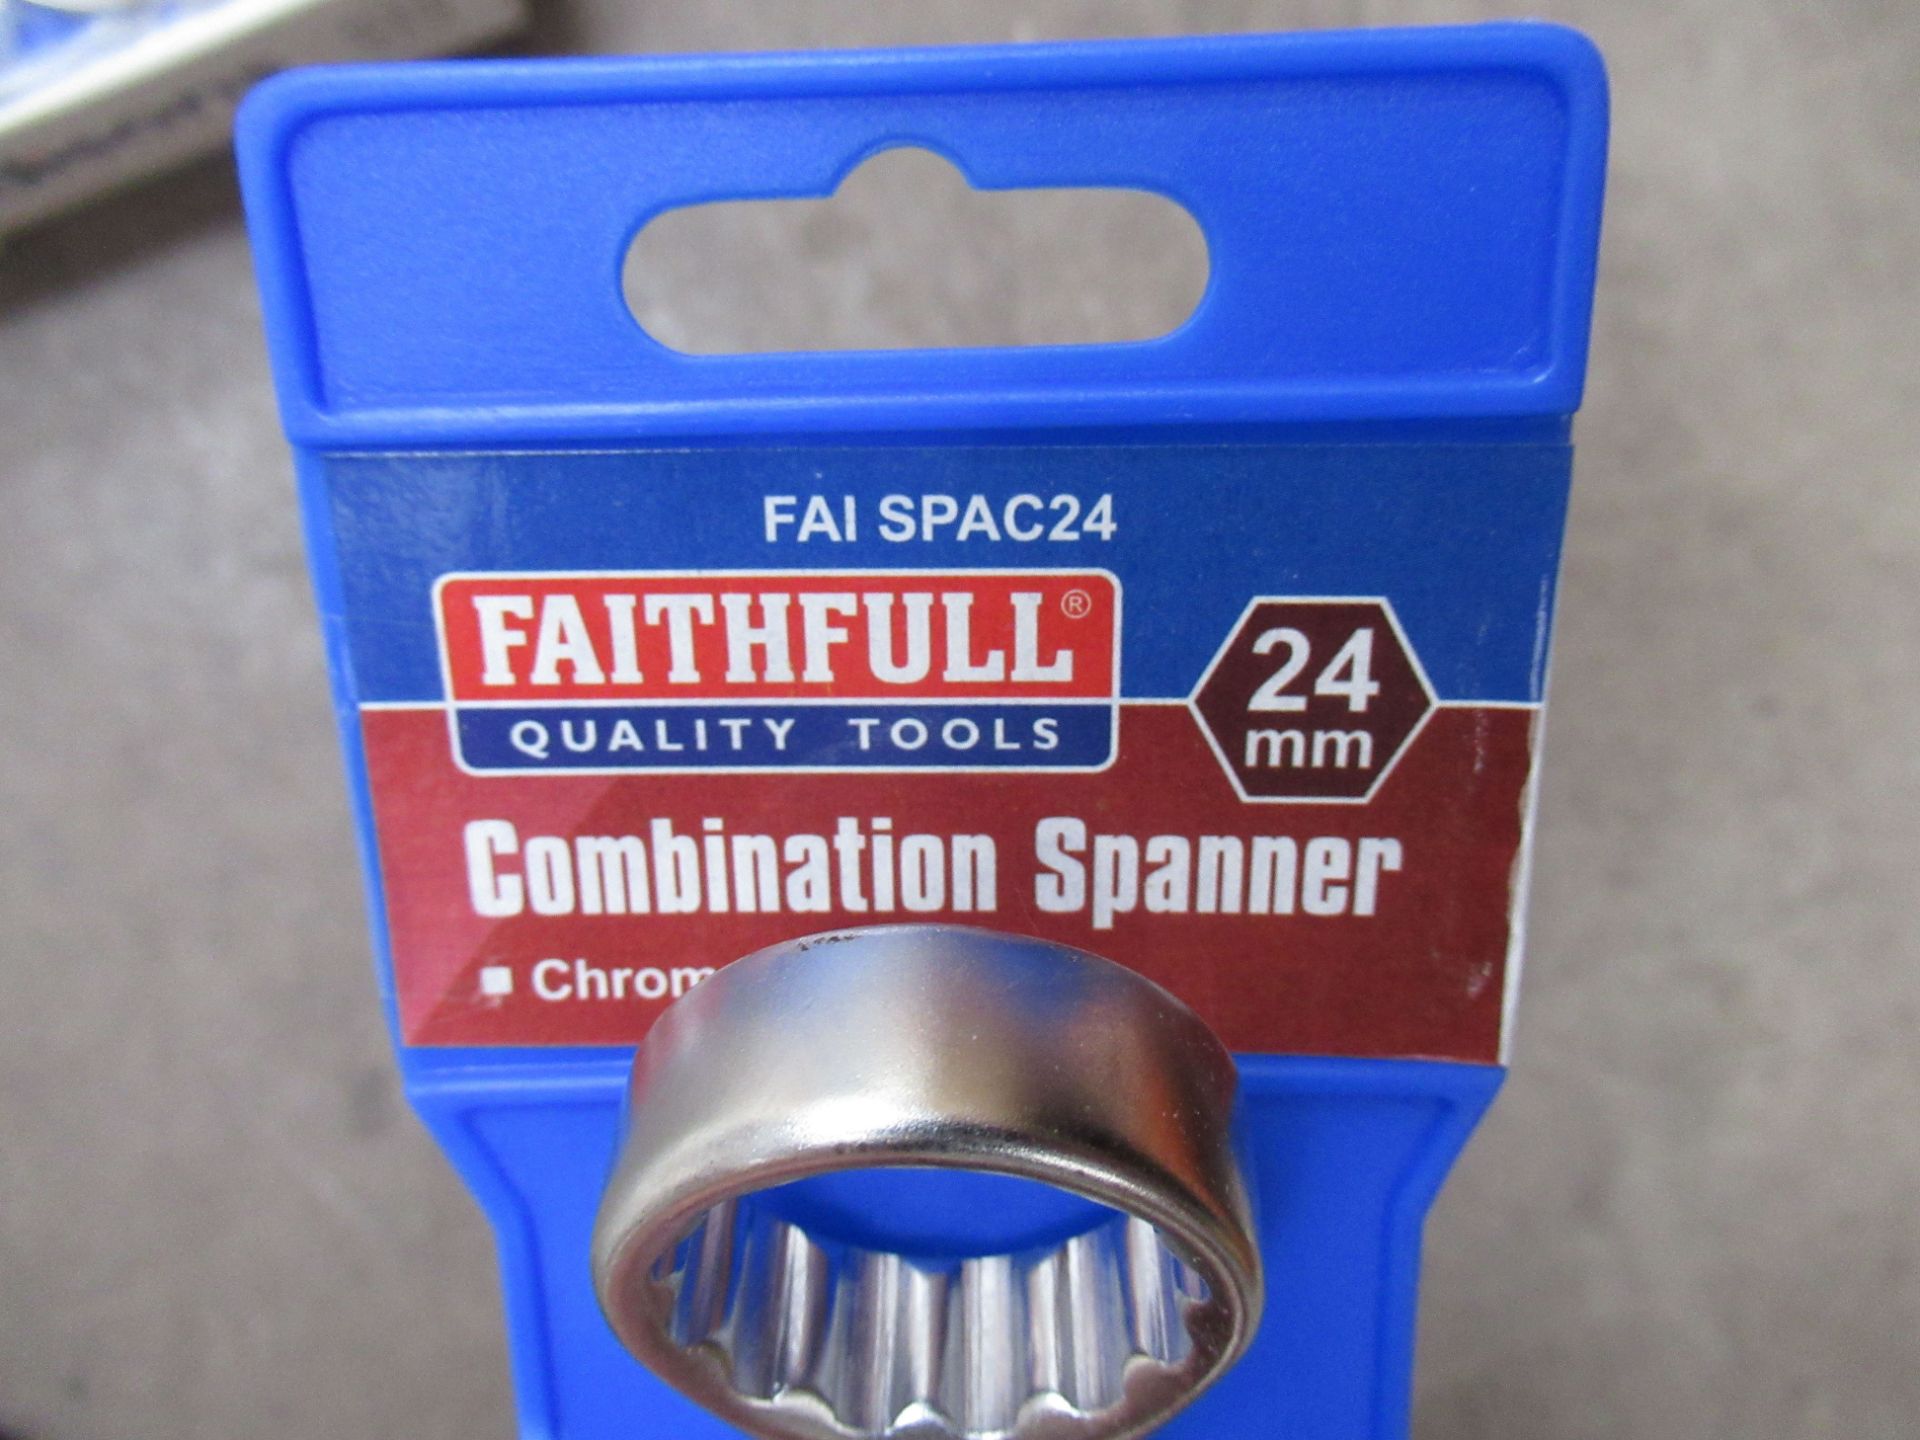 A Selection of Faithful 24mm Combination Spanners - Image 2 of 3